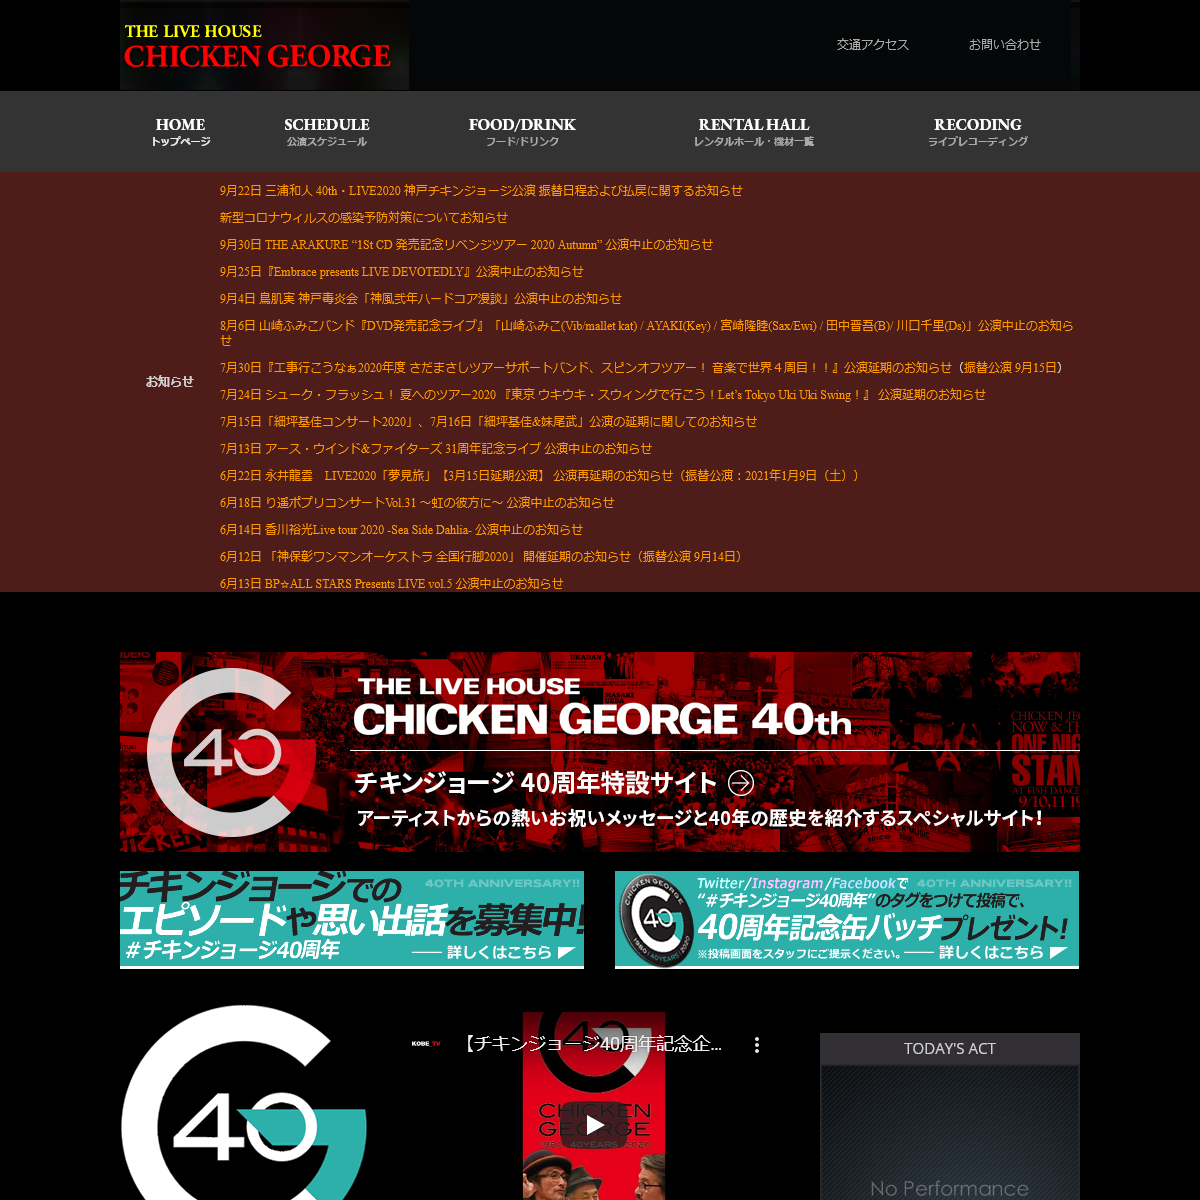 A complete backup of chicken-george.co.jp